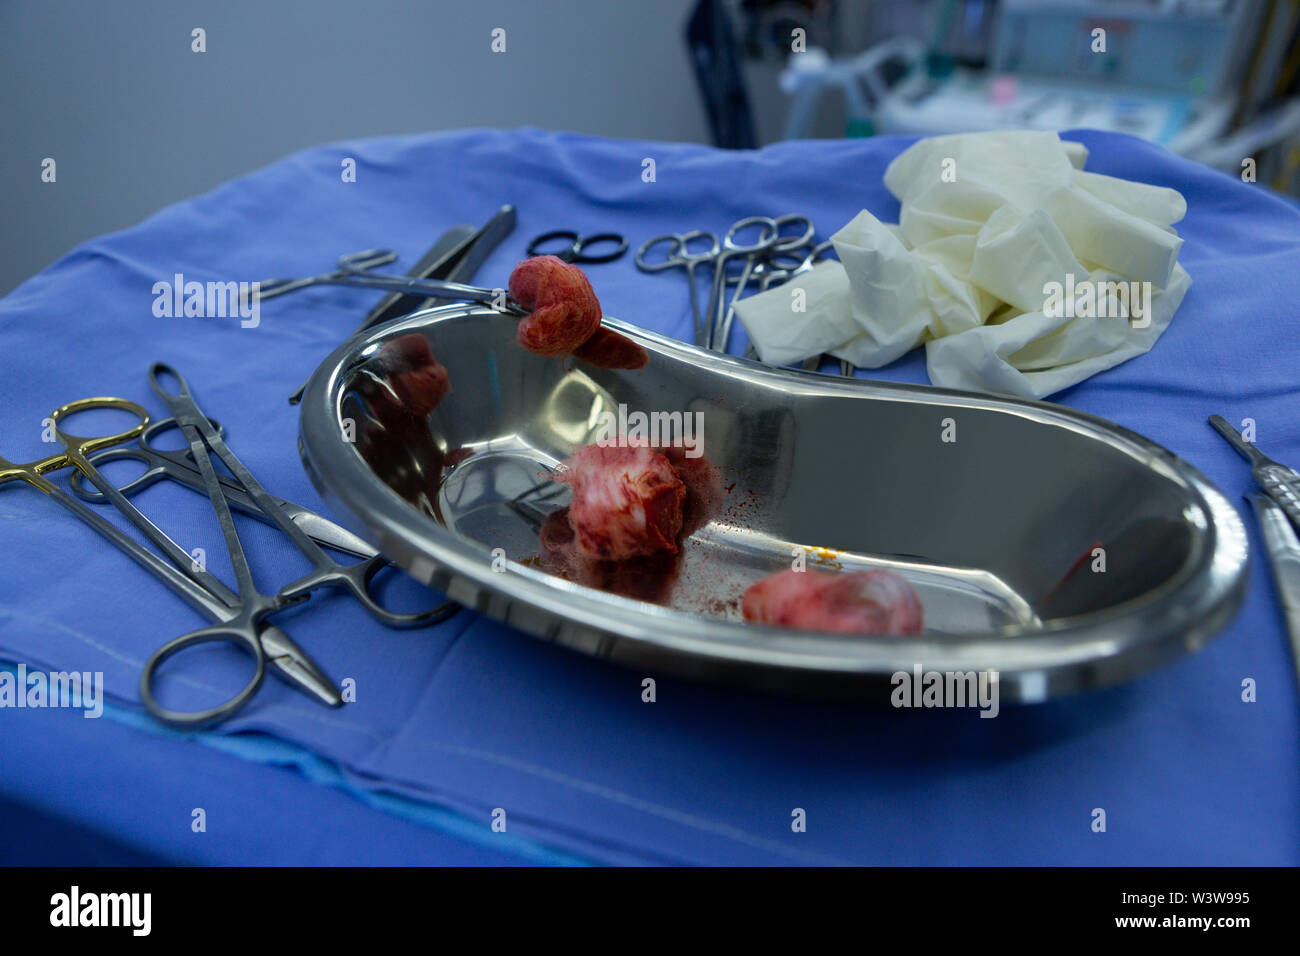 Surgical instruments and kidney dish on a table in operation room of hospital Stock Photo